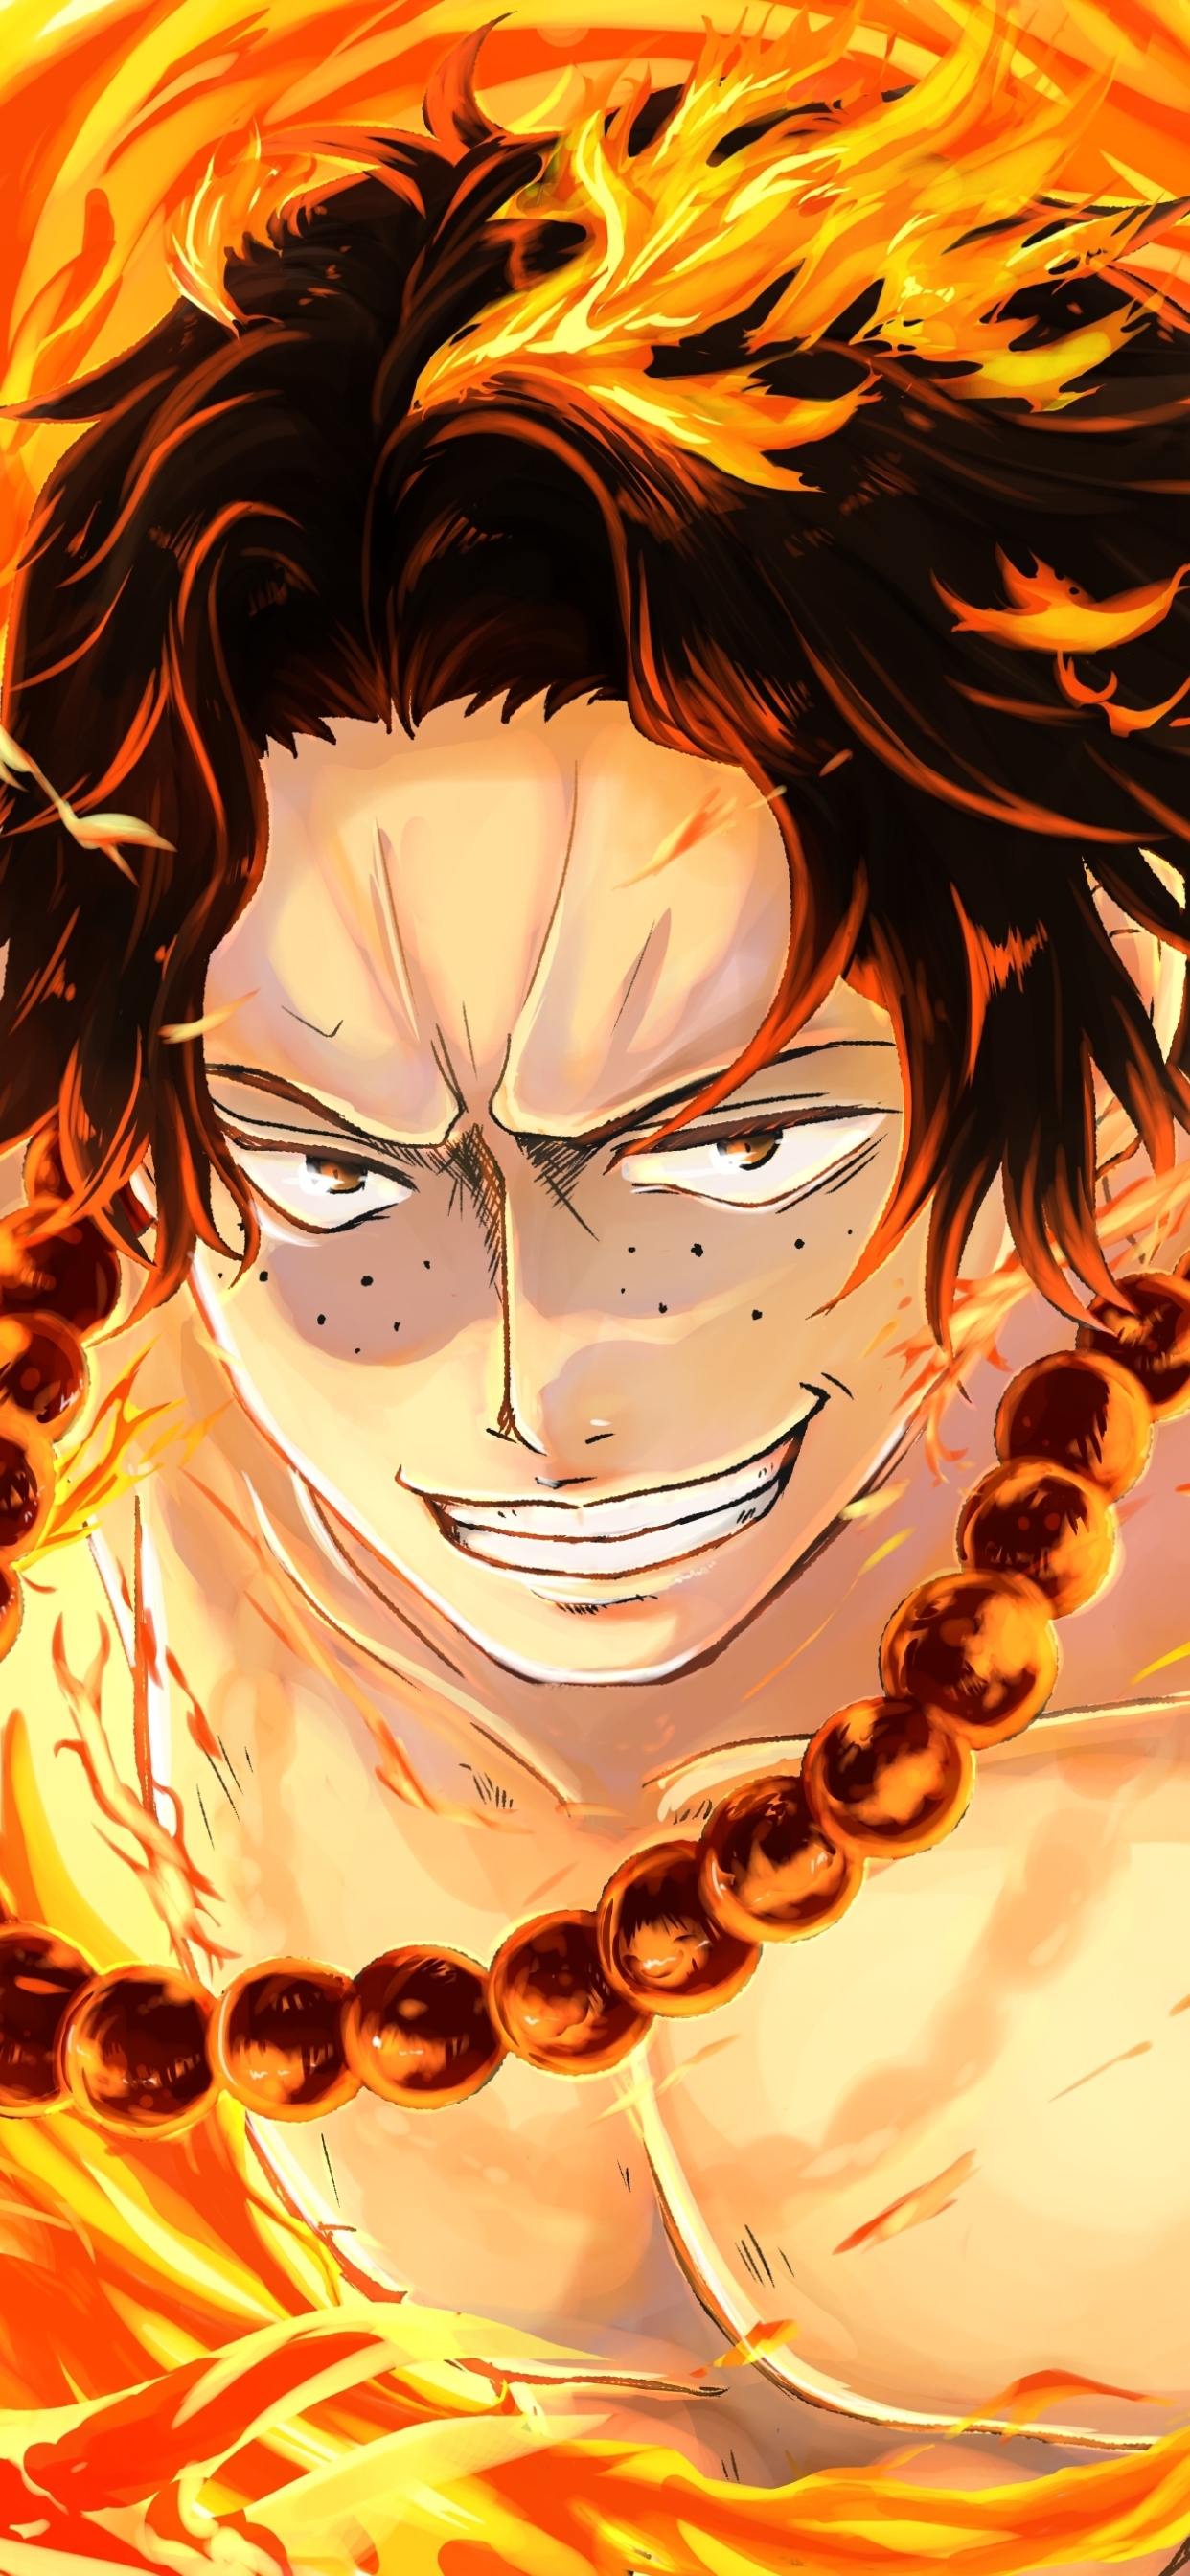 Wallpaper ID 317582  Anime One Piece Phone Wallpaper Portgas D Ace  1440x2960 free download